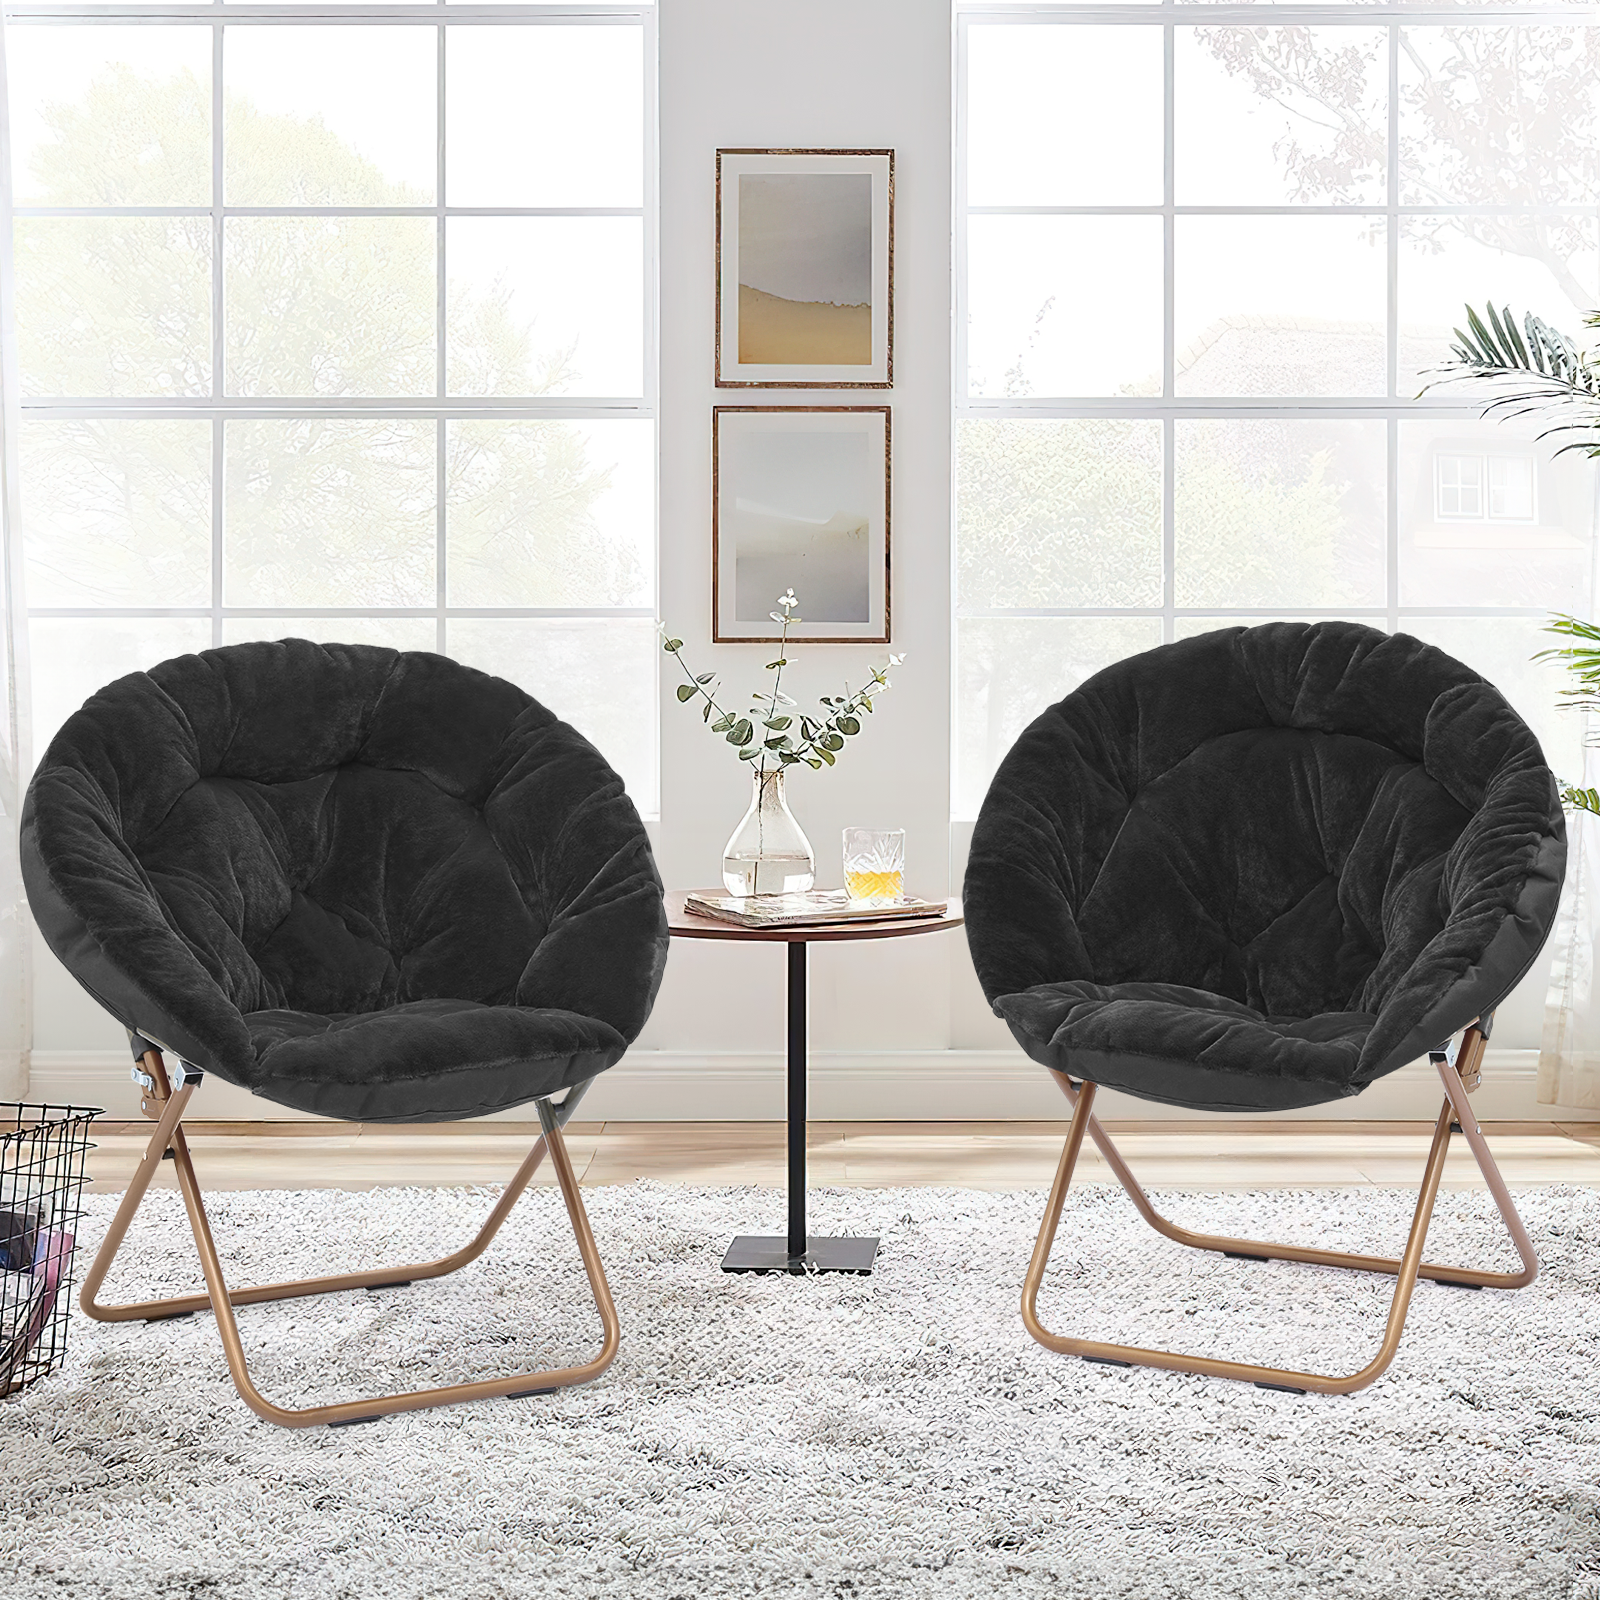 Magshion Set of 2 Saucer Chair Soft Faux Fur Folding Accent Chair, Lounge Lazy Chair Moon Chair Seat with Metal Frame for Bedroom Living Room, Black - image 3 of 10